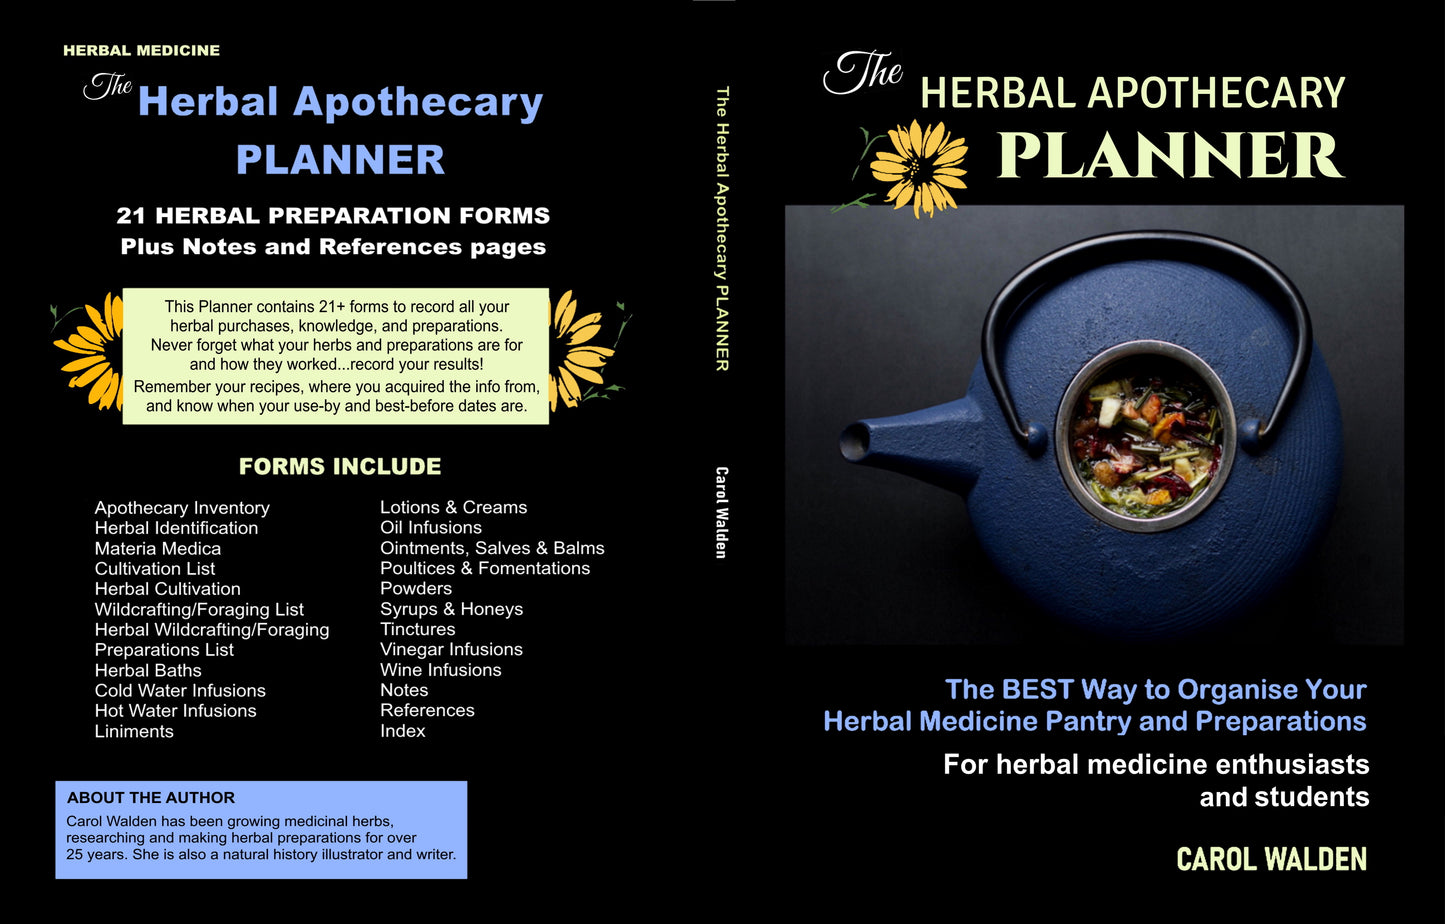 The Herbal Apothecary PLANNER